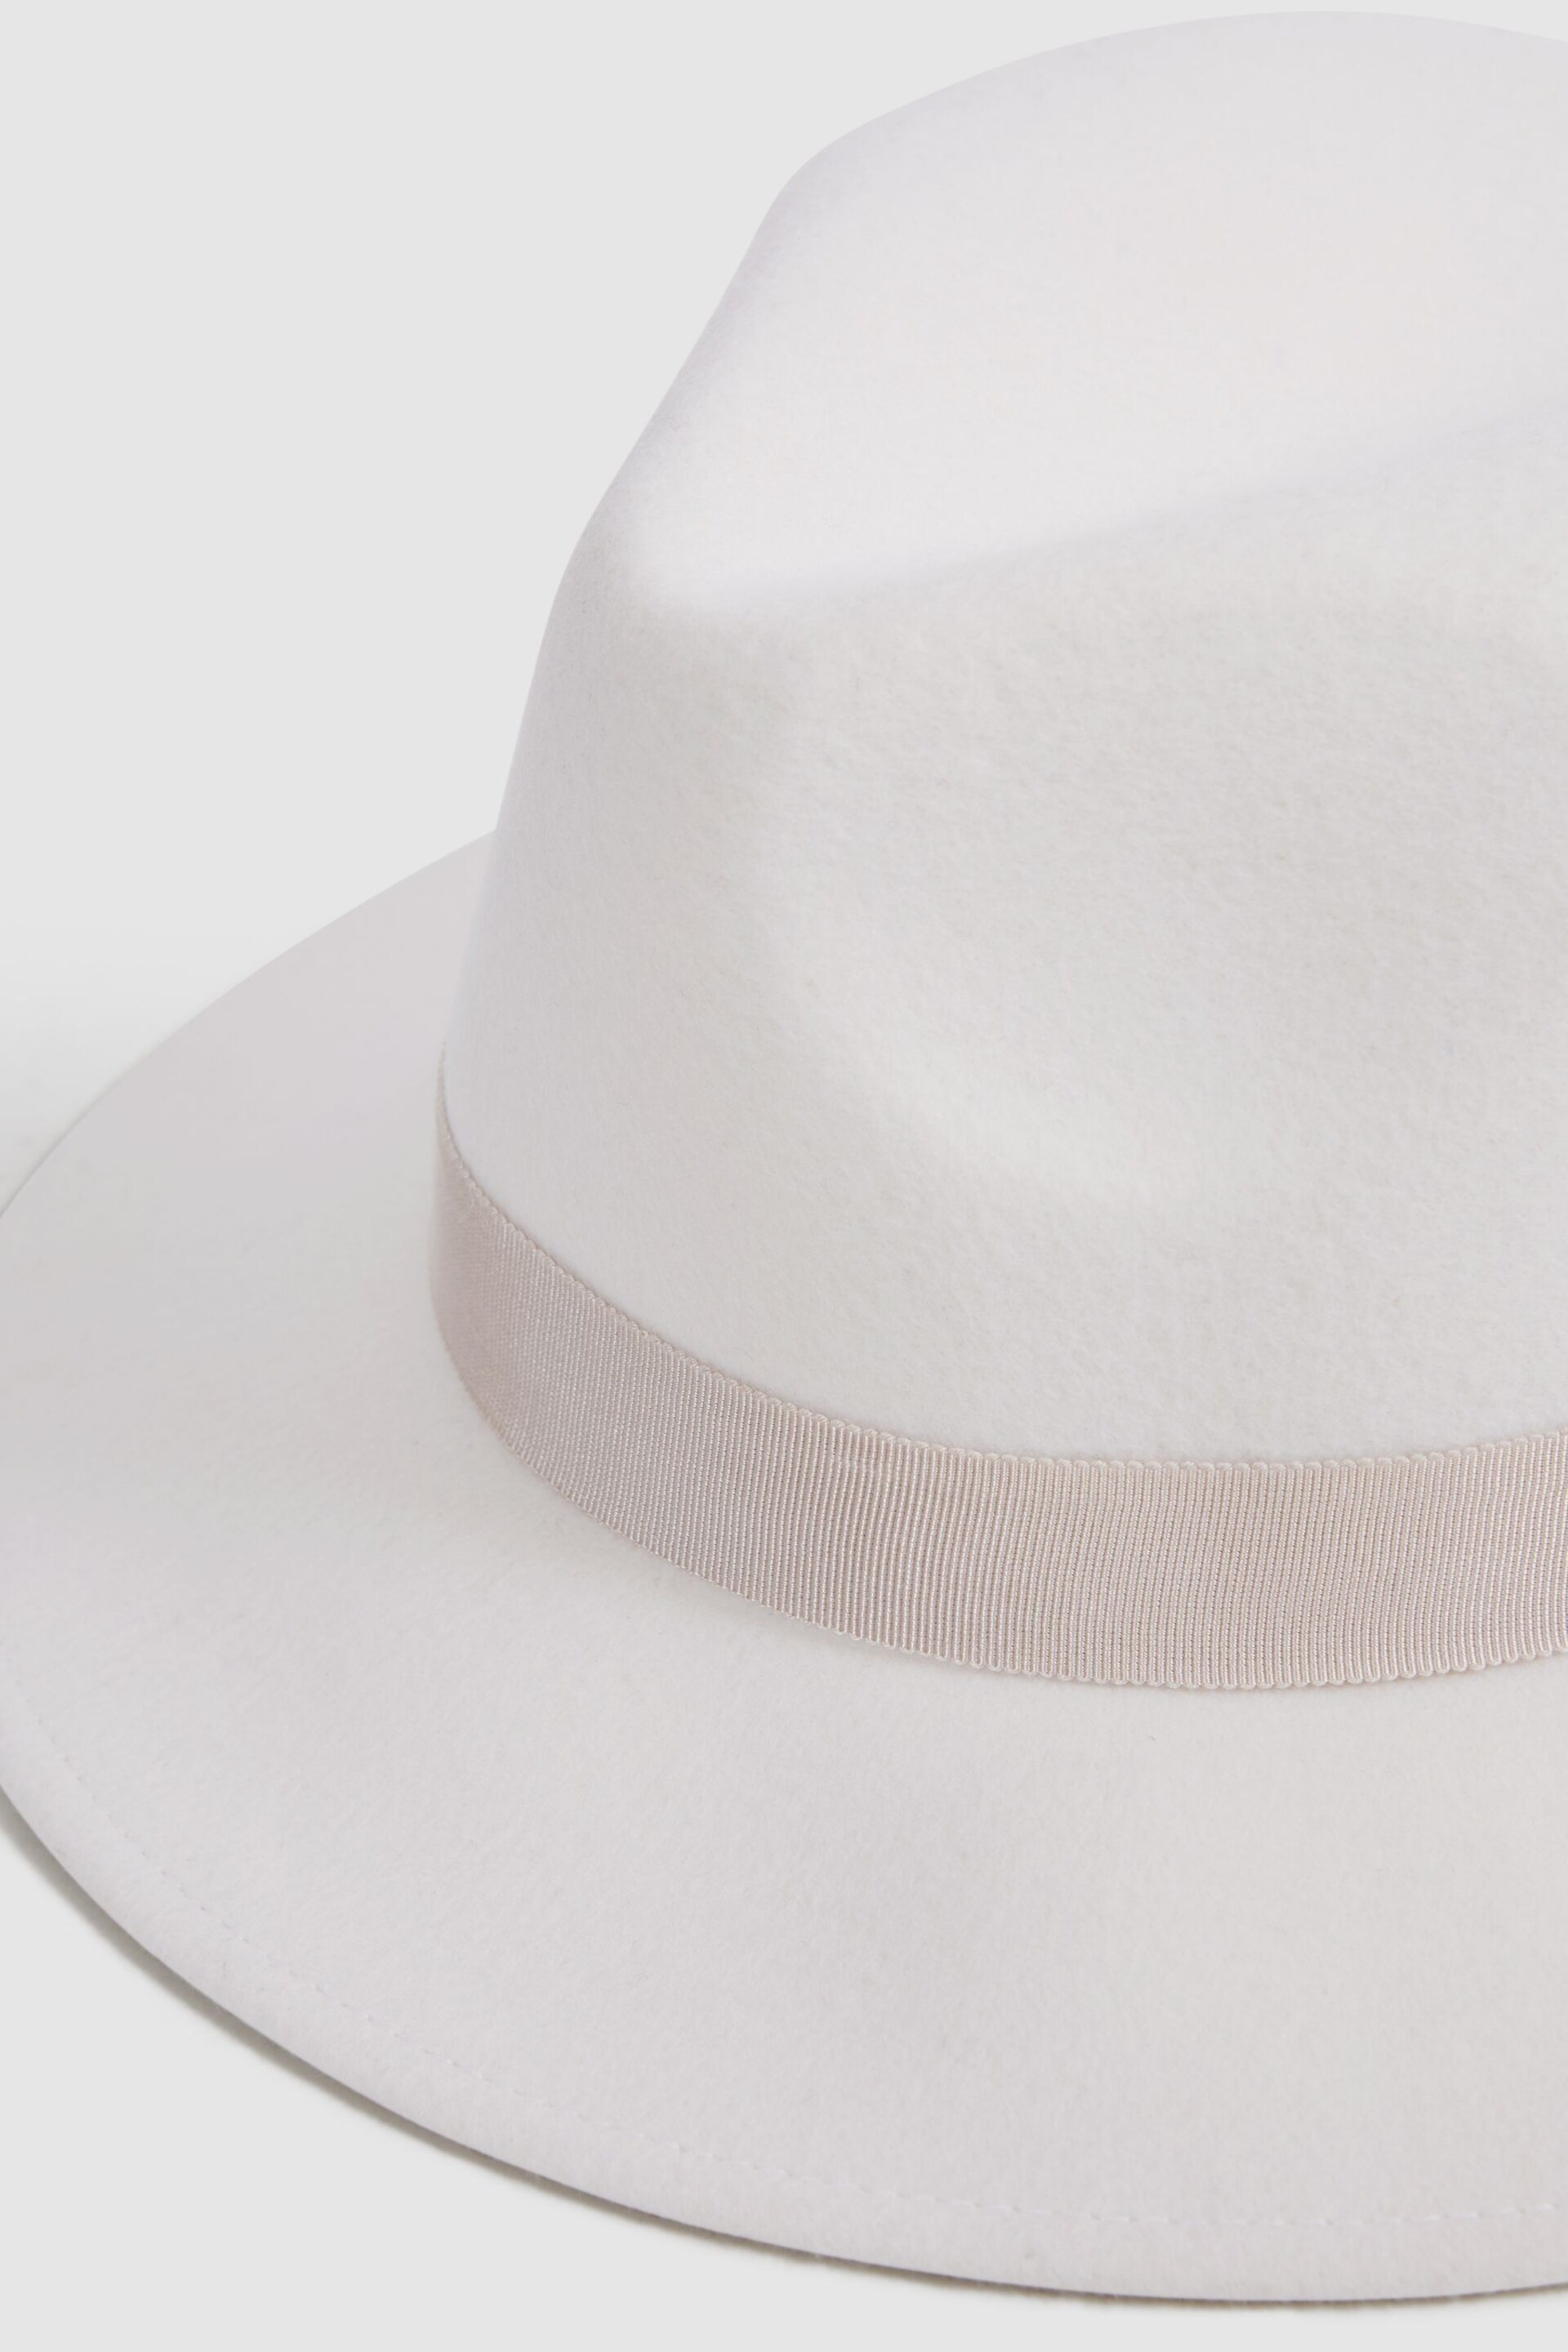 Reiss Ivory Ally Wool Fedora Hat - Image 4 of 4